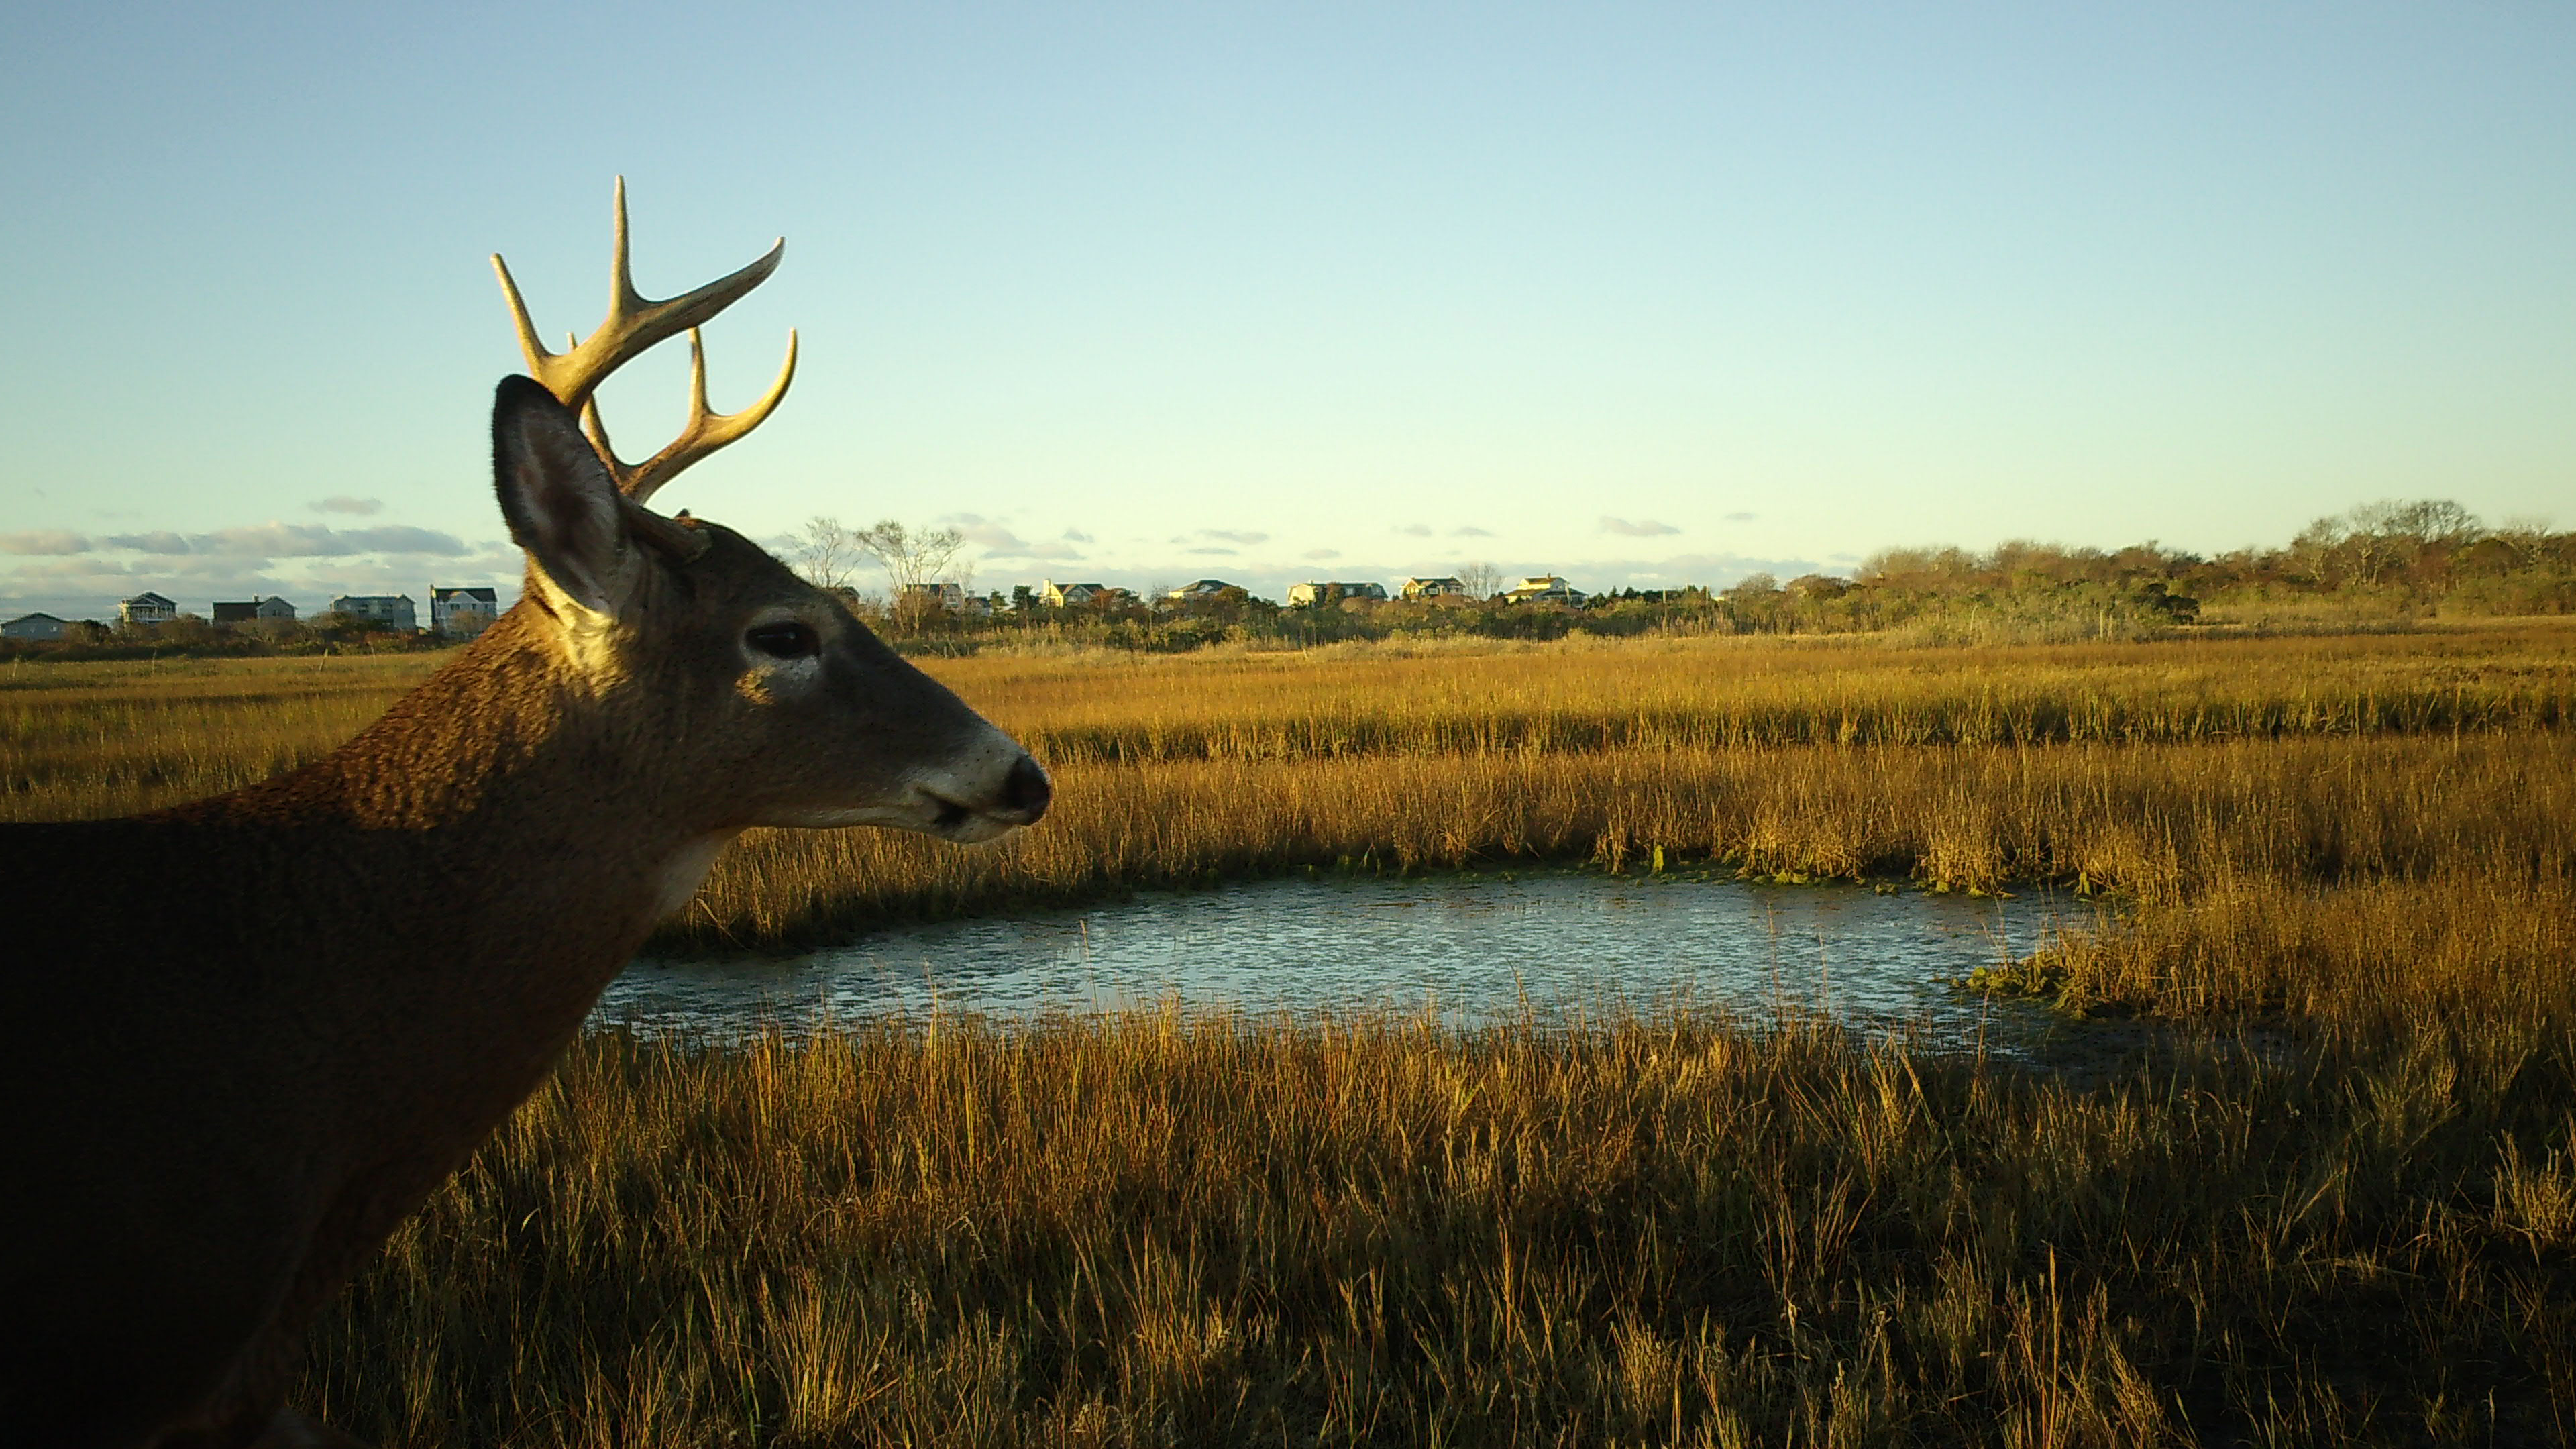 A deer with a small set of antlers looks out over grassland with a small body of water in the center of the image, and forests and a pale blue sky in the background.